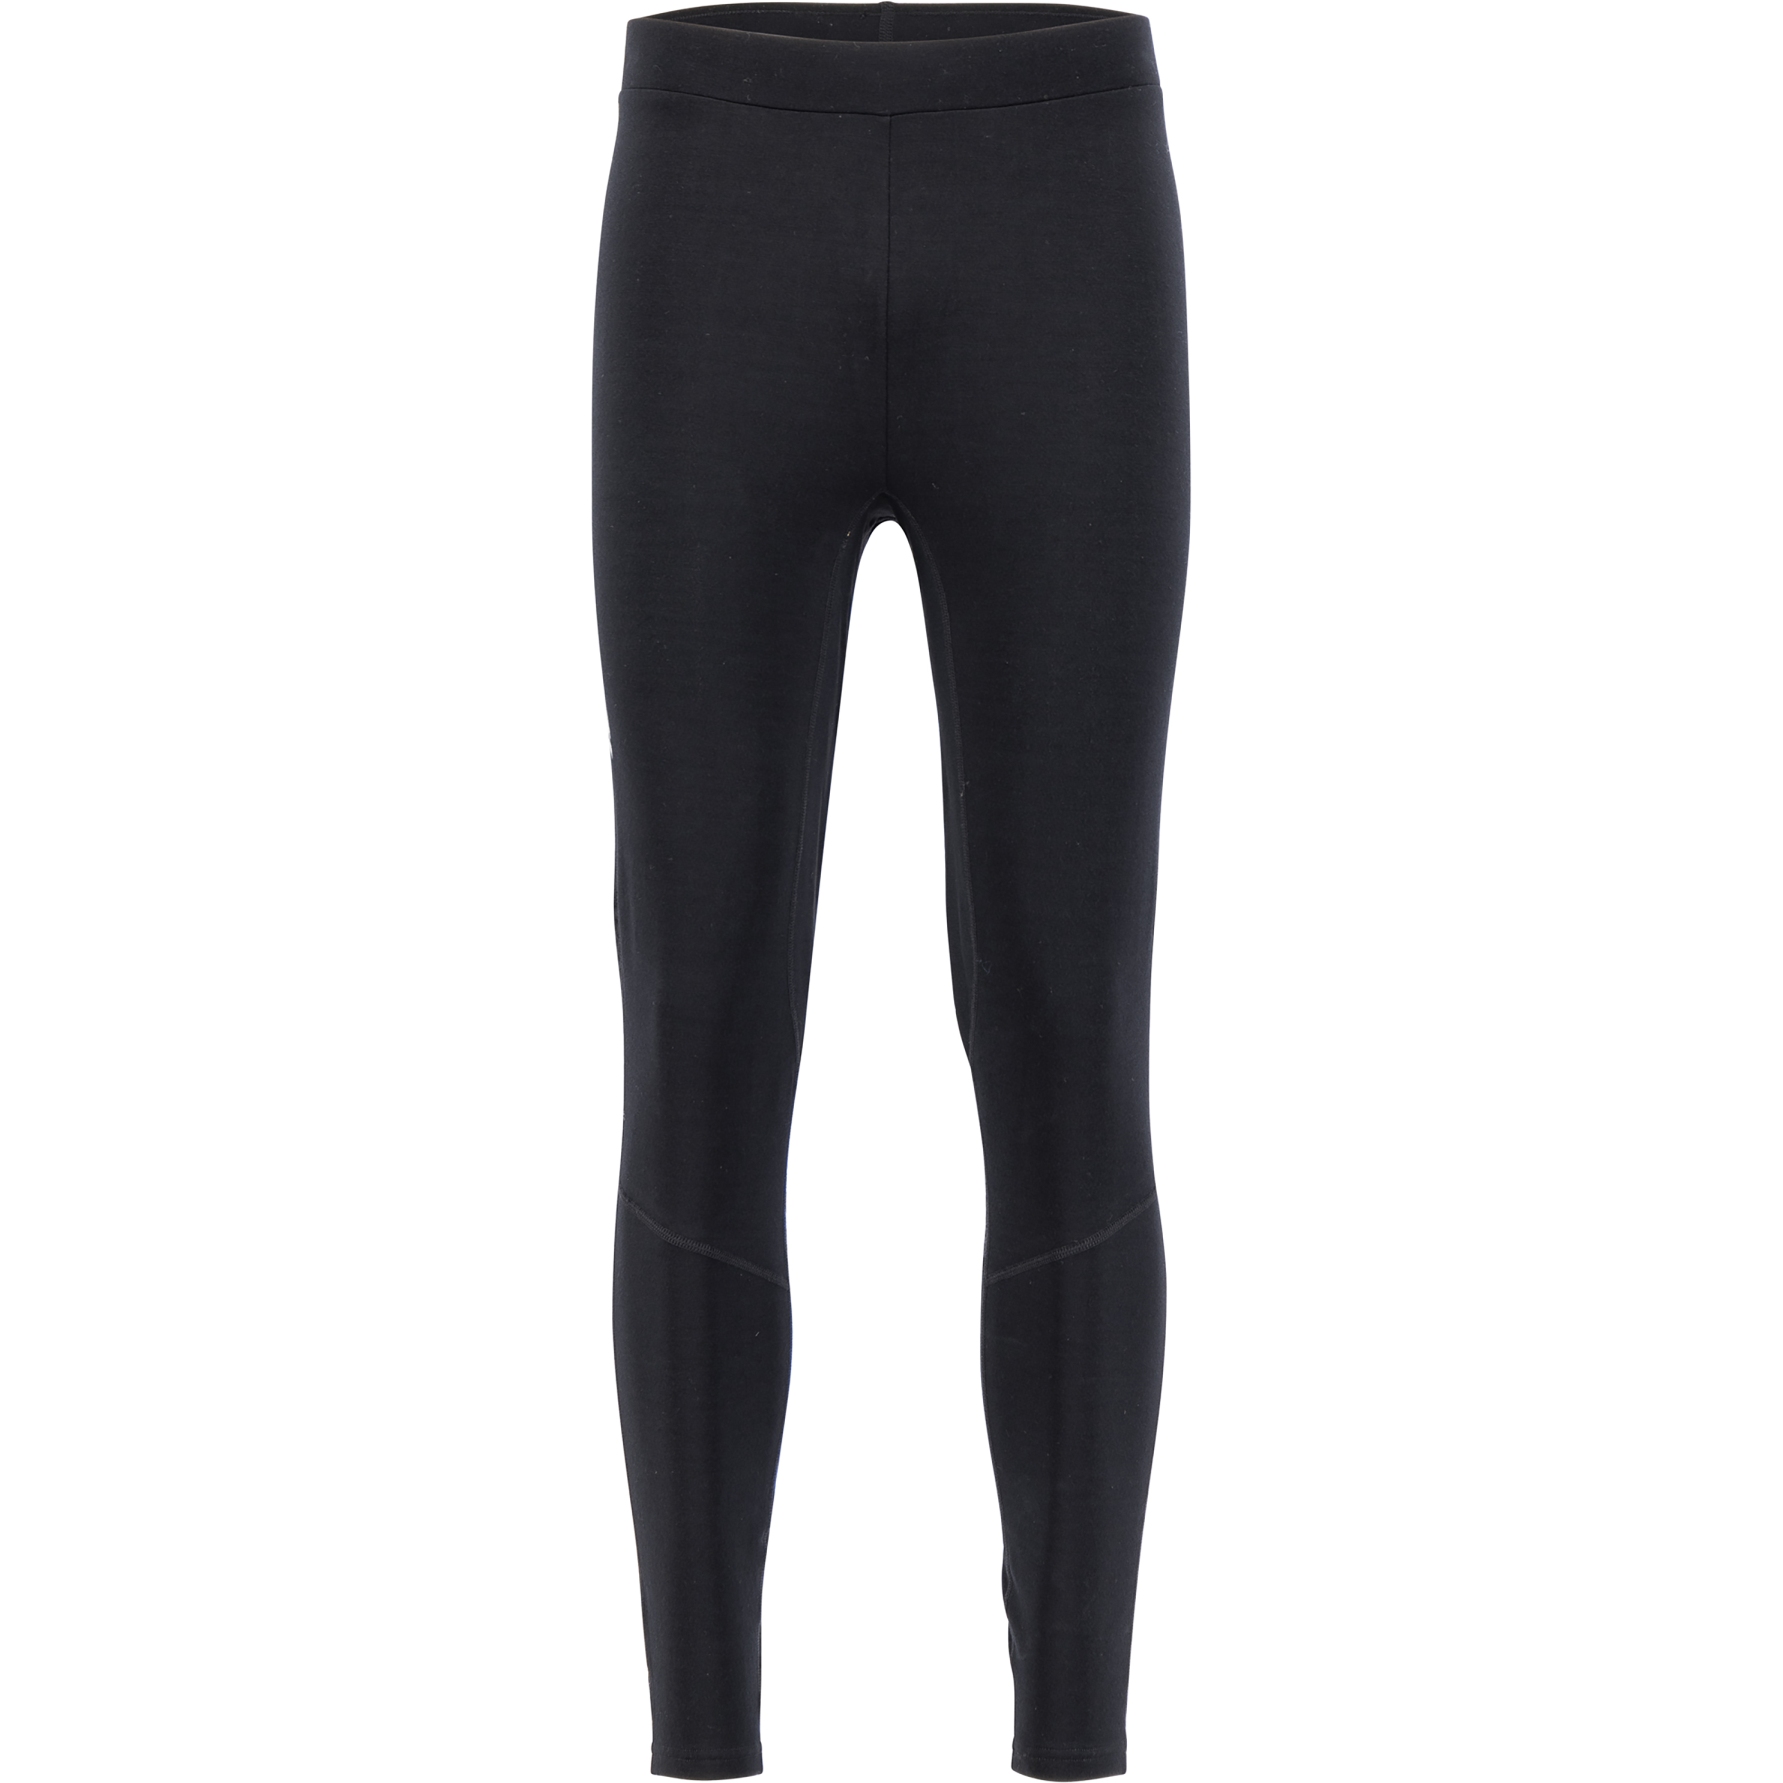 Picture of Ulvang Gira Warm Tights - Black